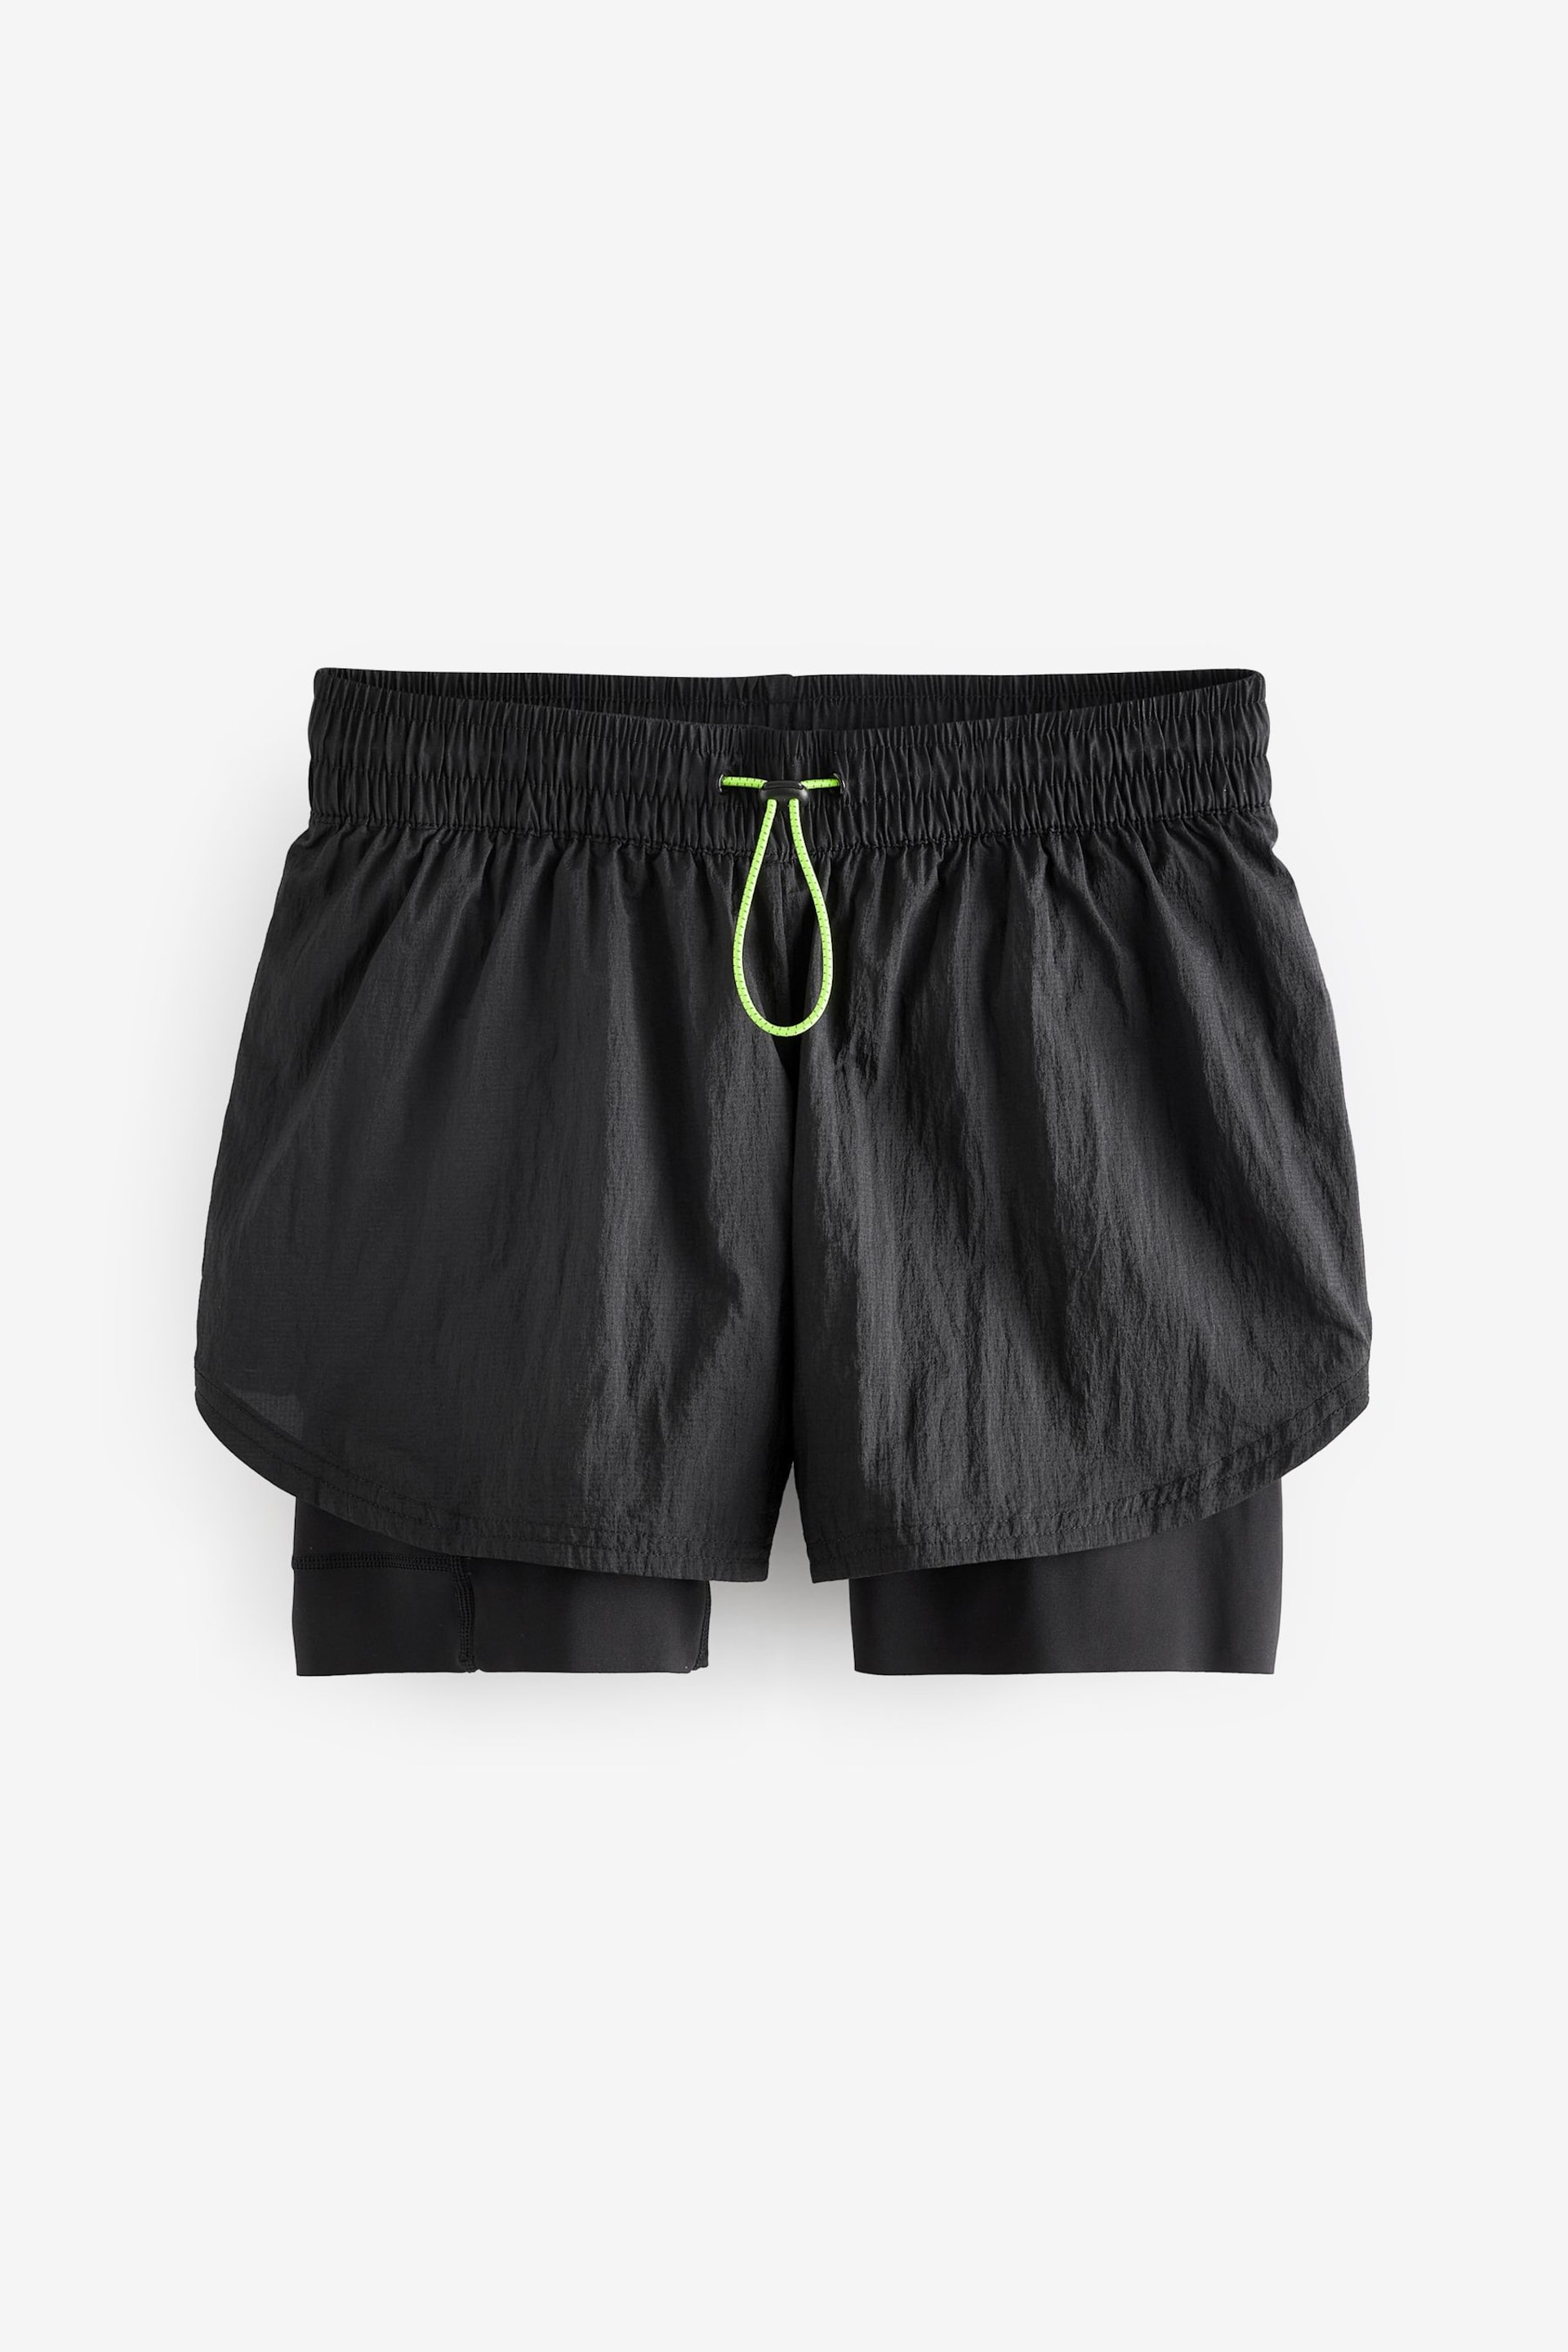 Black High Waisted 2-in-1 Sport Shorts - Image 6 of 7